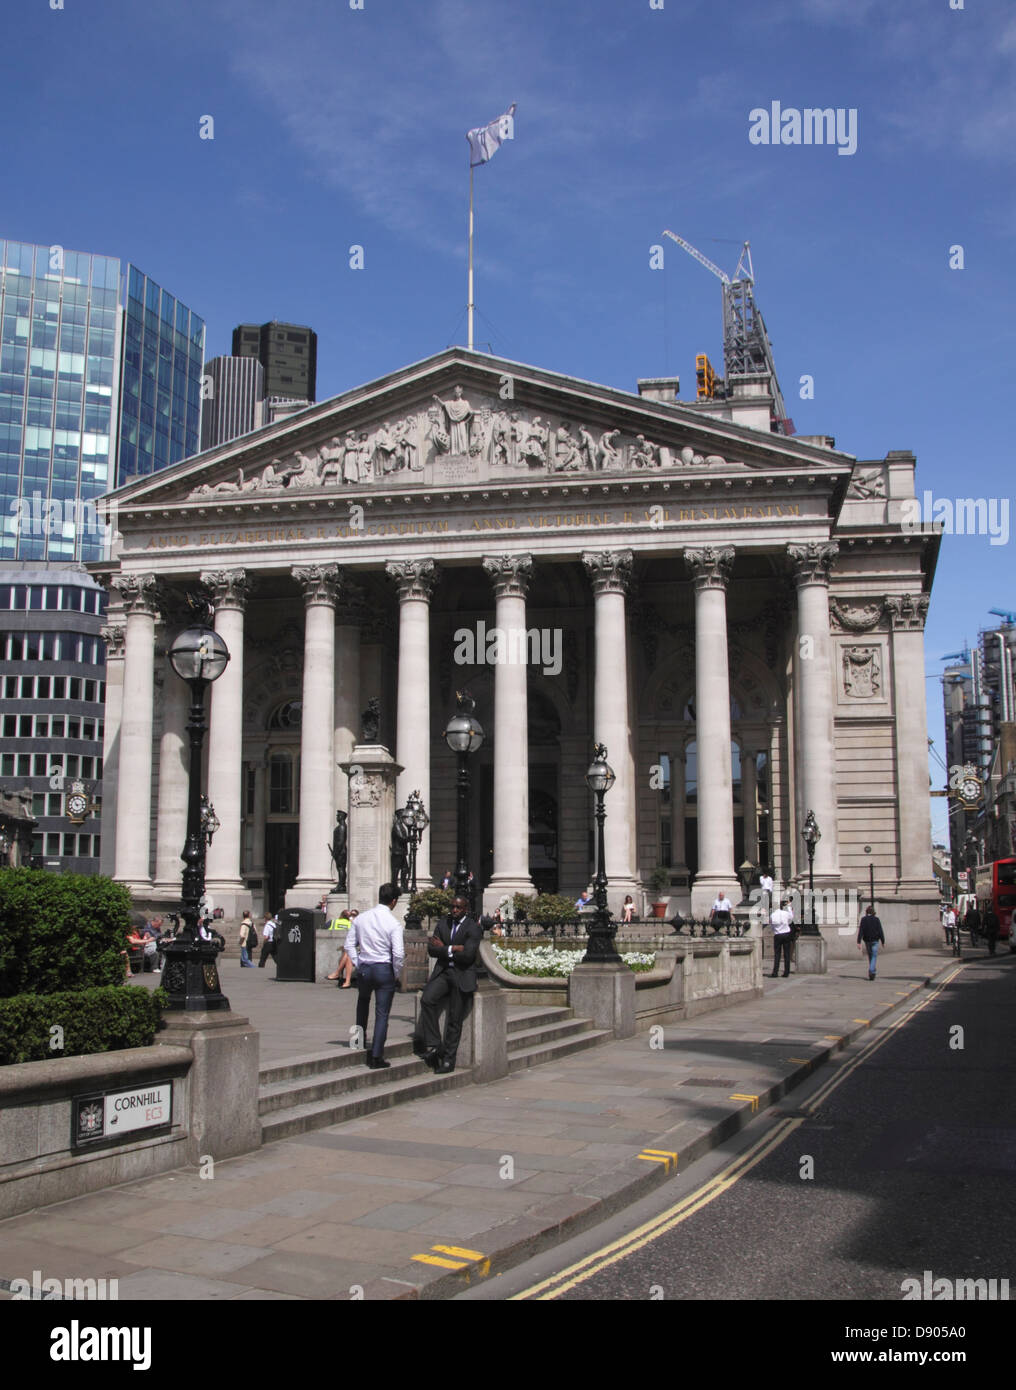 The Royal Exchange building London Stock Photo